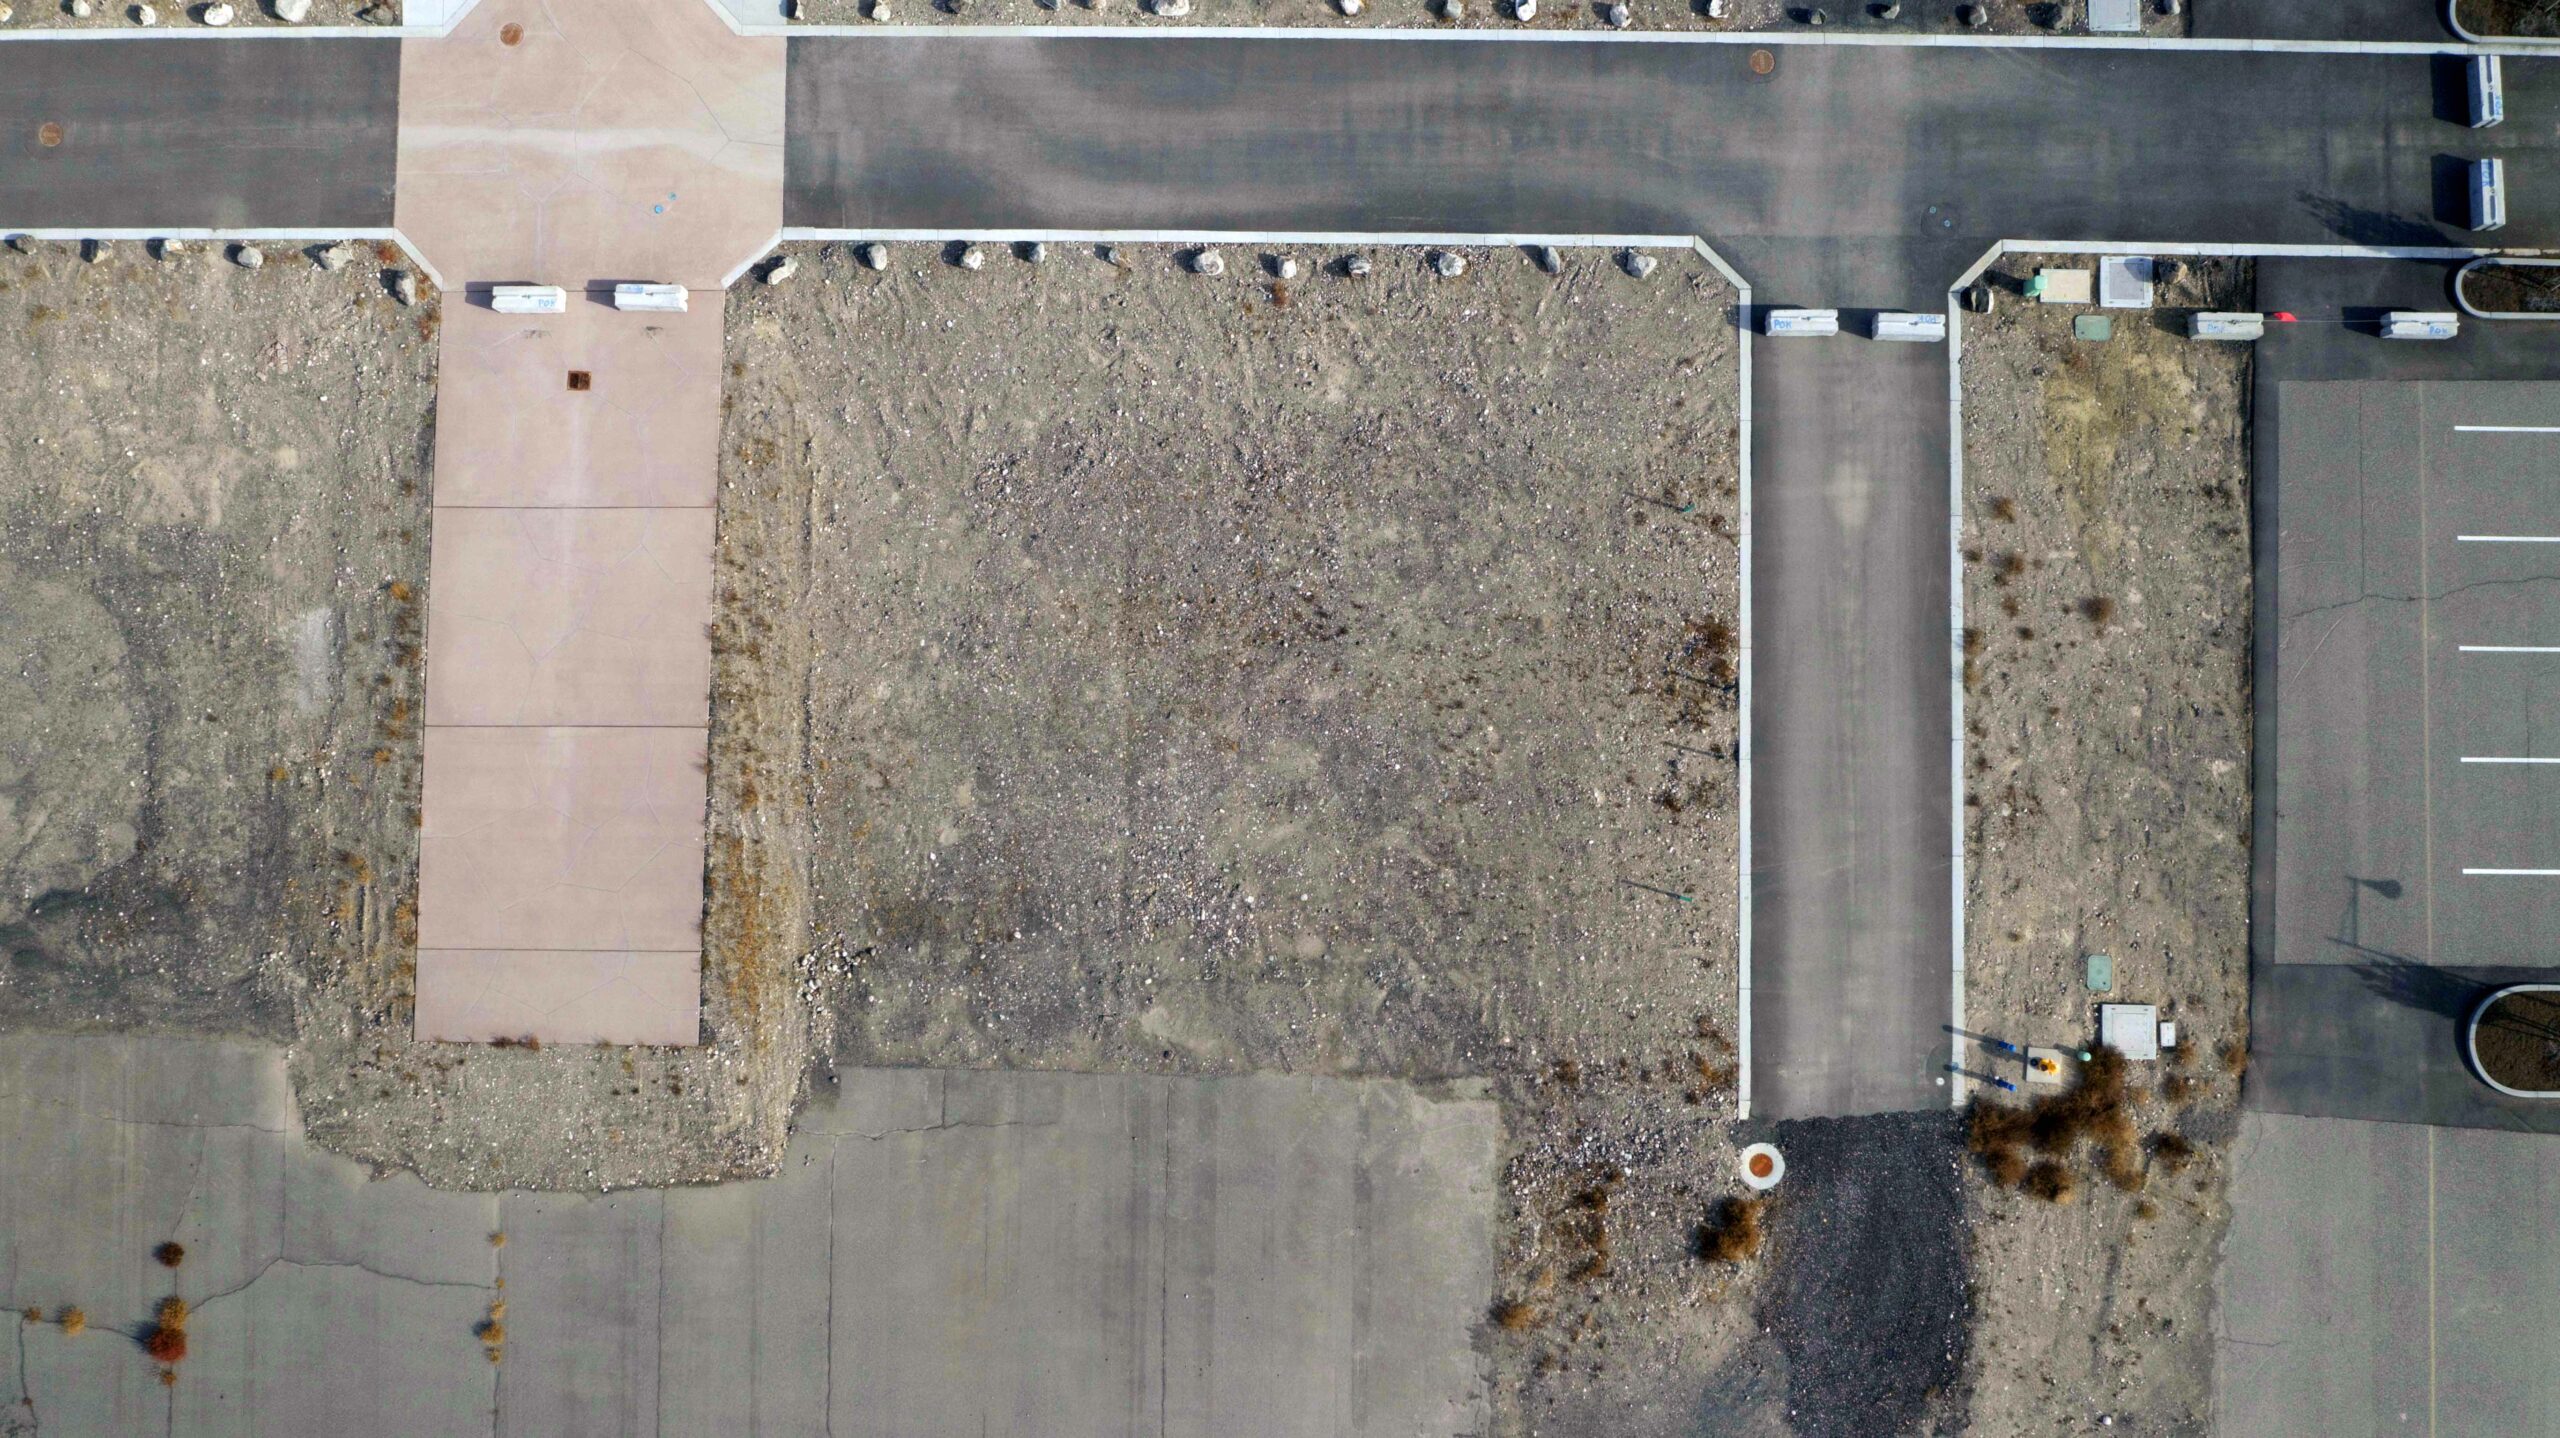 Direct overhead aerial of the section J parcels at Vista Field.